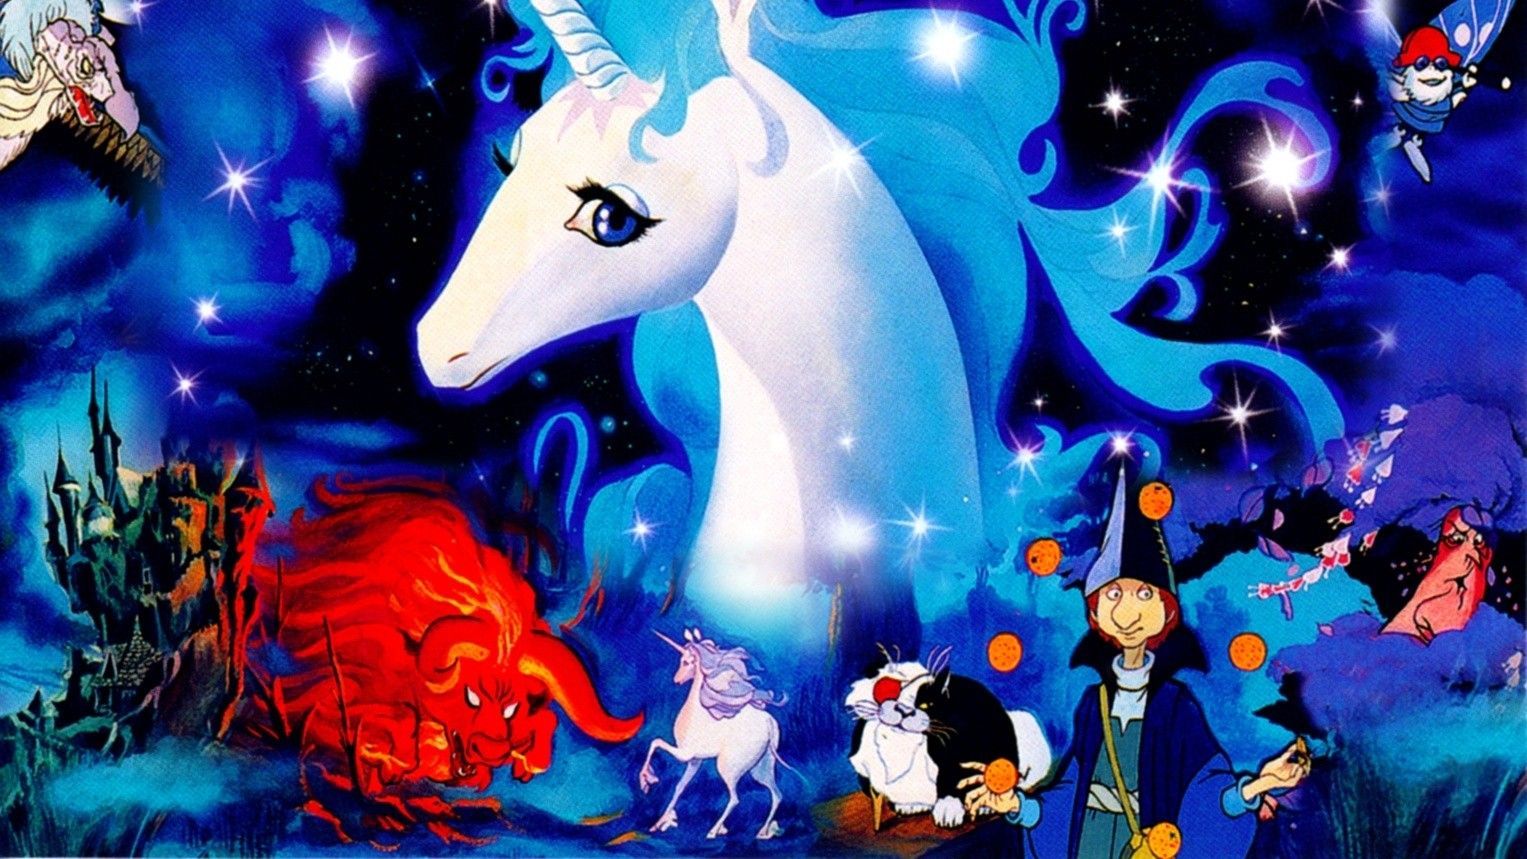 The Last Unicorn based on the book of the same name by Peter S. Beagle. The last unicorn, Unicorn wallpaper, Anime